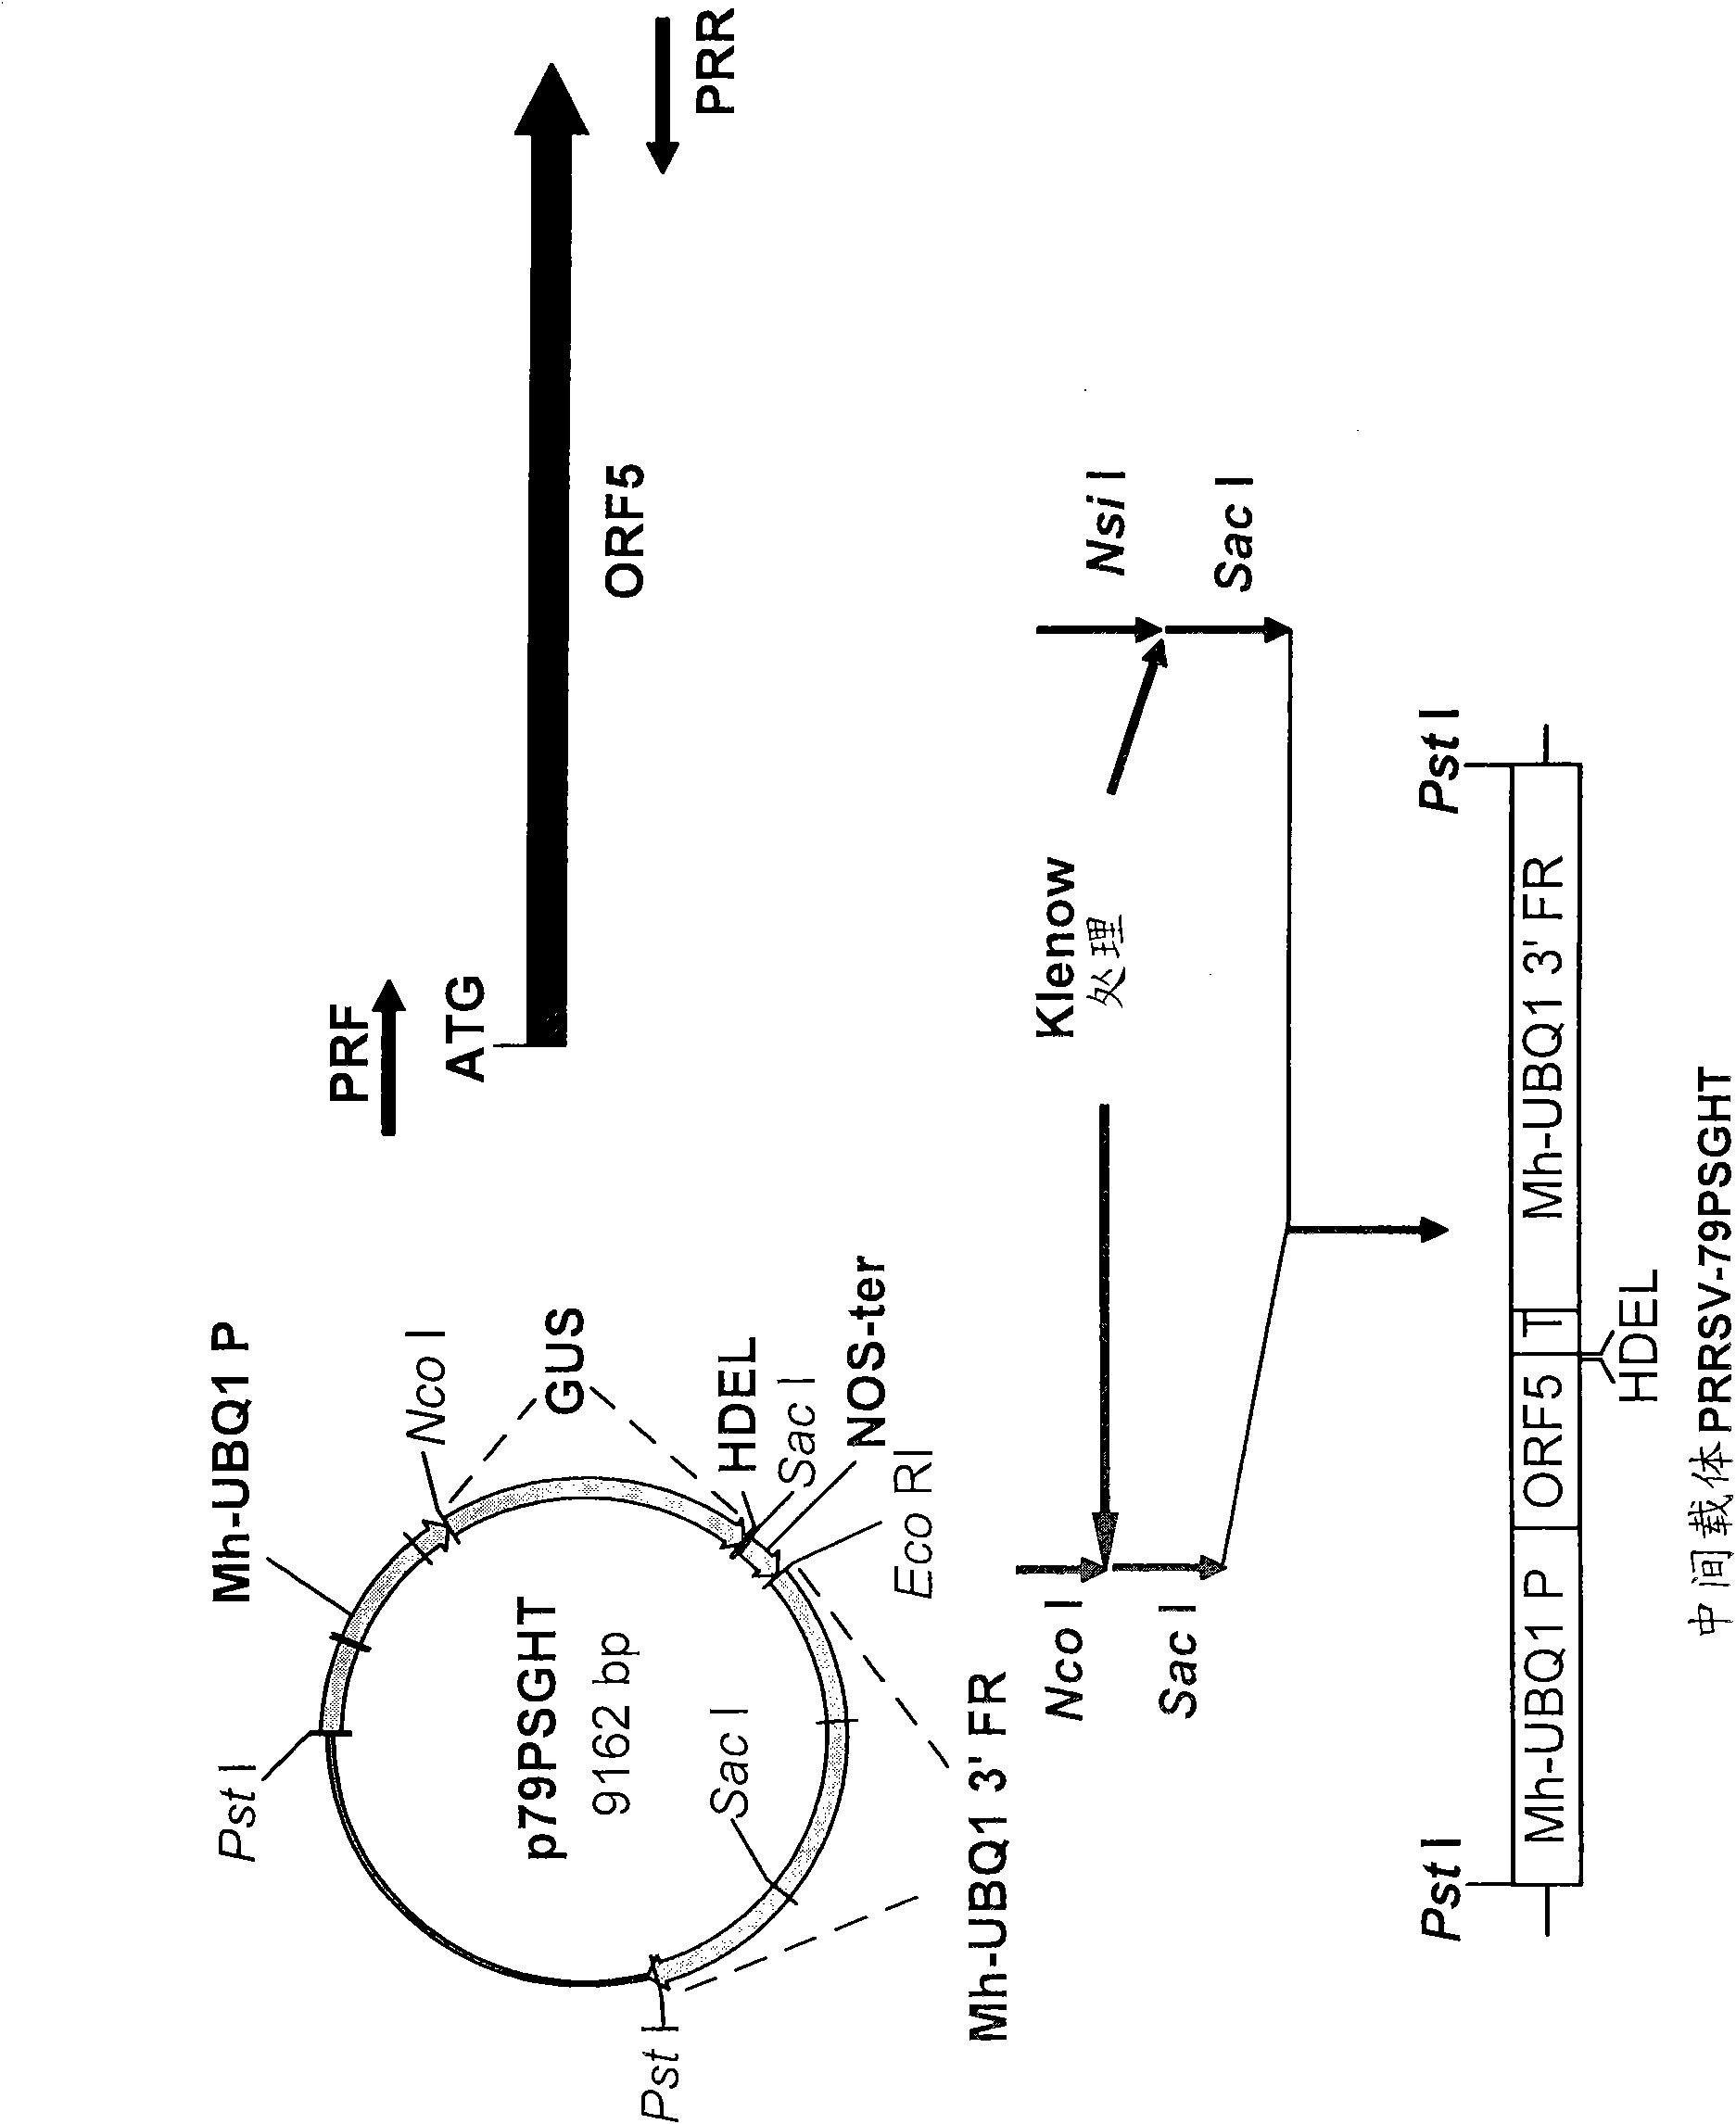 Gene expression composition, PRRS (Porcine Reproductive and Respiratory Syndrome) oral vaccine and preparation methods thereof